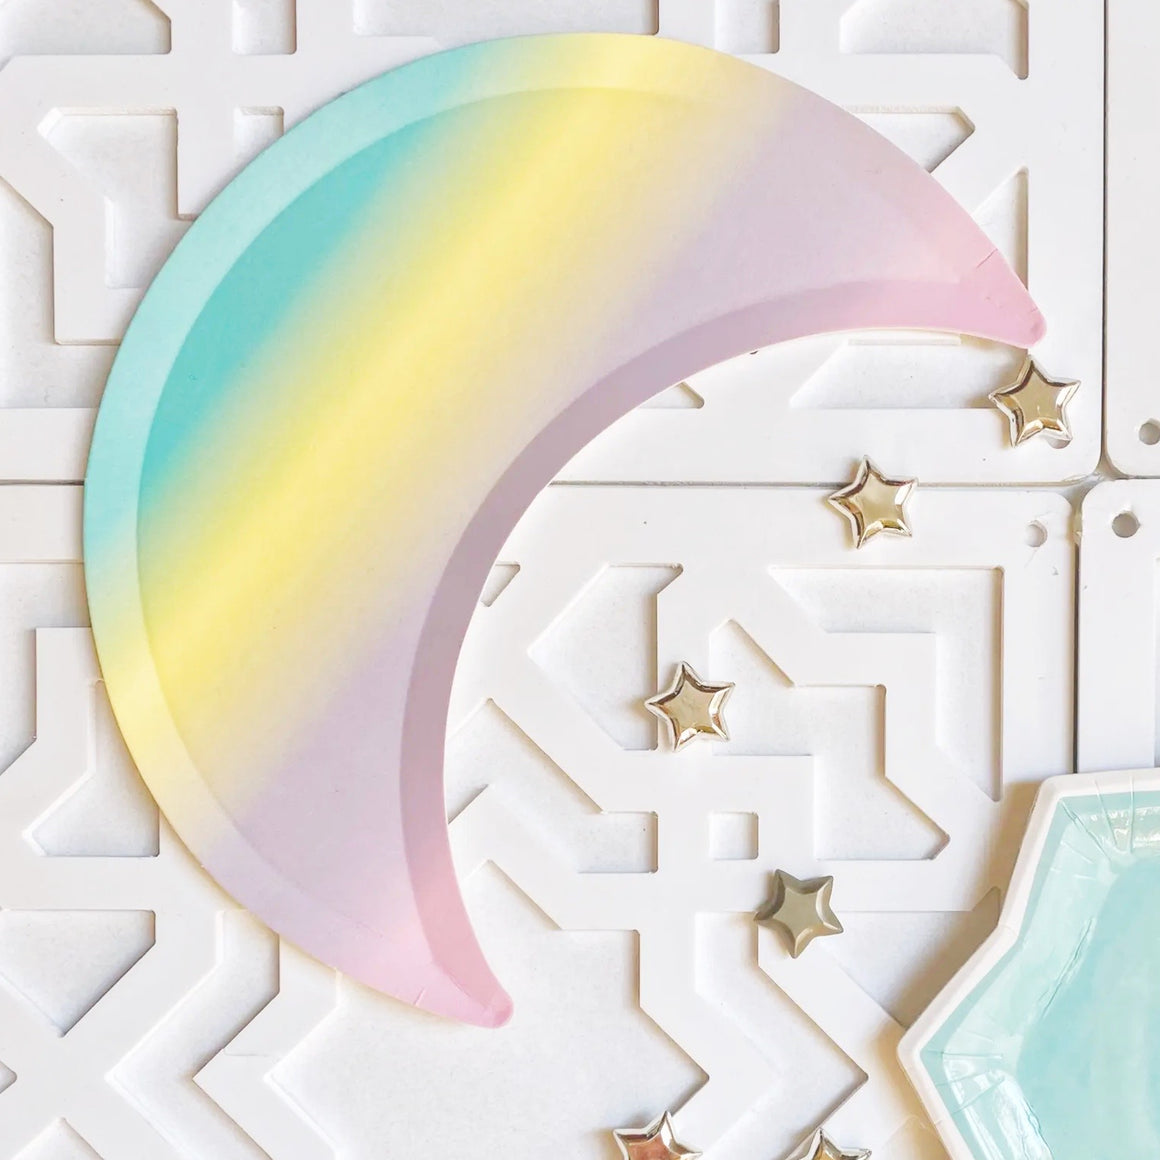 PLATES SMALL - RAINBOW PASTEL OMBRE CRESCENT MOON